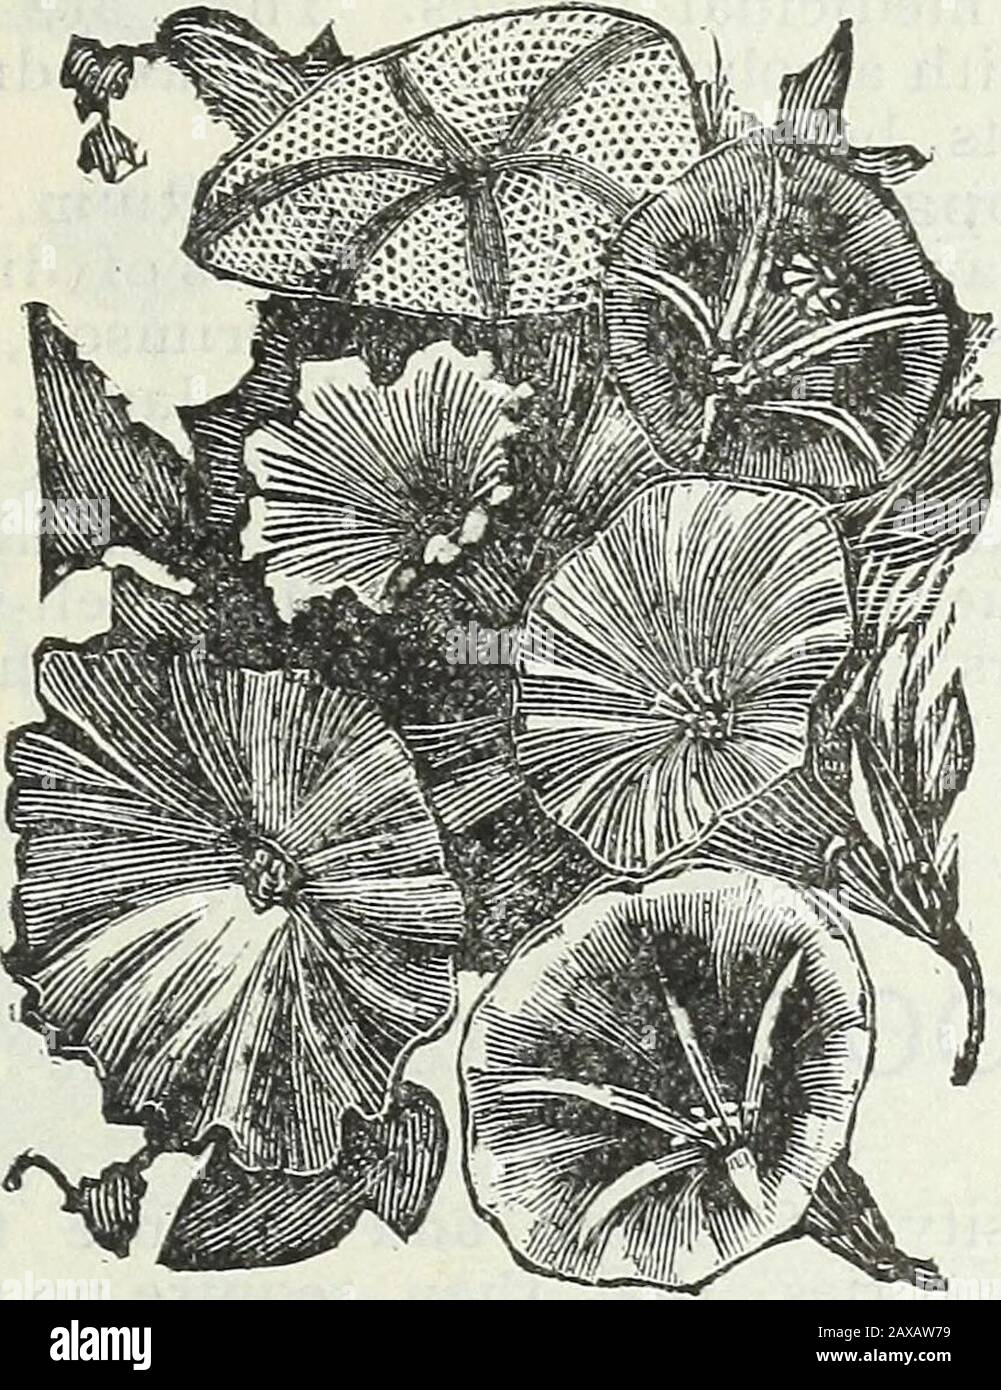 Steckler's seed catalogue and garden manual for the southern states : 1902 . Maurandia Barclayana. Ipomaea Quamoclit rosea. Red Cy-press Vine. Very beautiful, delicate foli-age of rapid growth, with scarlet star-shaped flowers. Ipomaea Quamoclit alba. White Cy-press Vine. The same as the Red variety. Lathyrus odoratus. Sweet Peas. Beau-tiful flowers of all colors, very showy.Good for cut flowers. Six feet high. De-cember till April We Carry a„t&lt; uil^ine of Planet, Jr., Hand Tools. GARDEN MANUAL FOR THE SOUTHERN STATES. 119 Maurandia Barclay ana. Mixed Maii-randia. A slender growing vine of Stock Photo